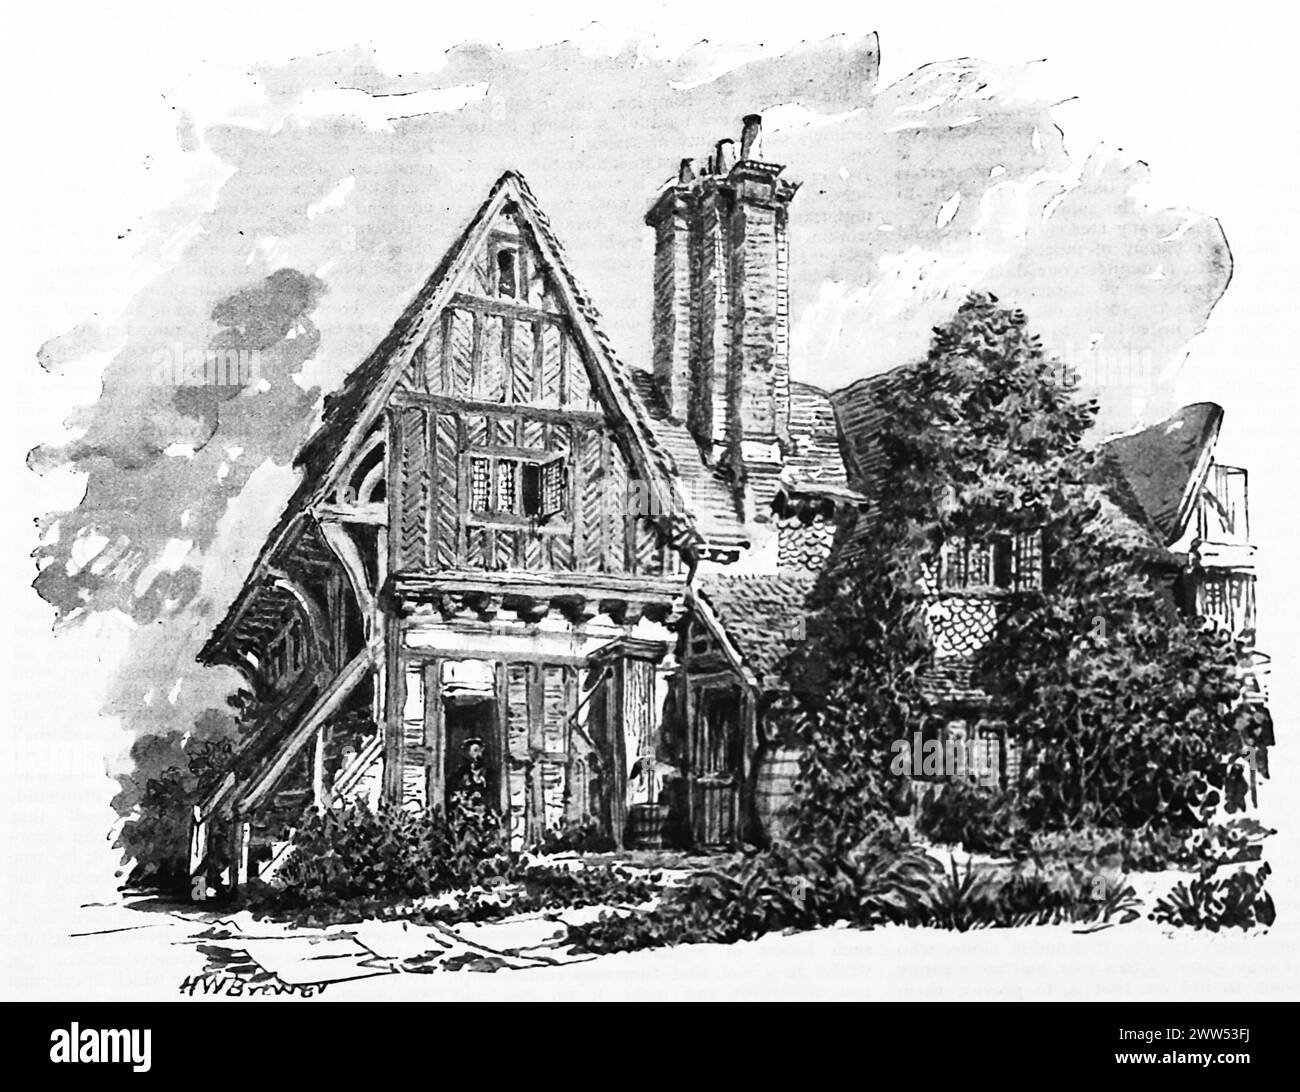 At Ewhurst, Surrey, an old English cottage, by H.W. Brewer. Black and white. Photograph taken from a magazine originally published in 1898. Stock Photo